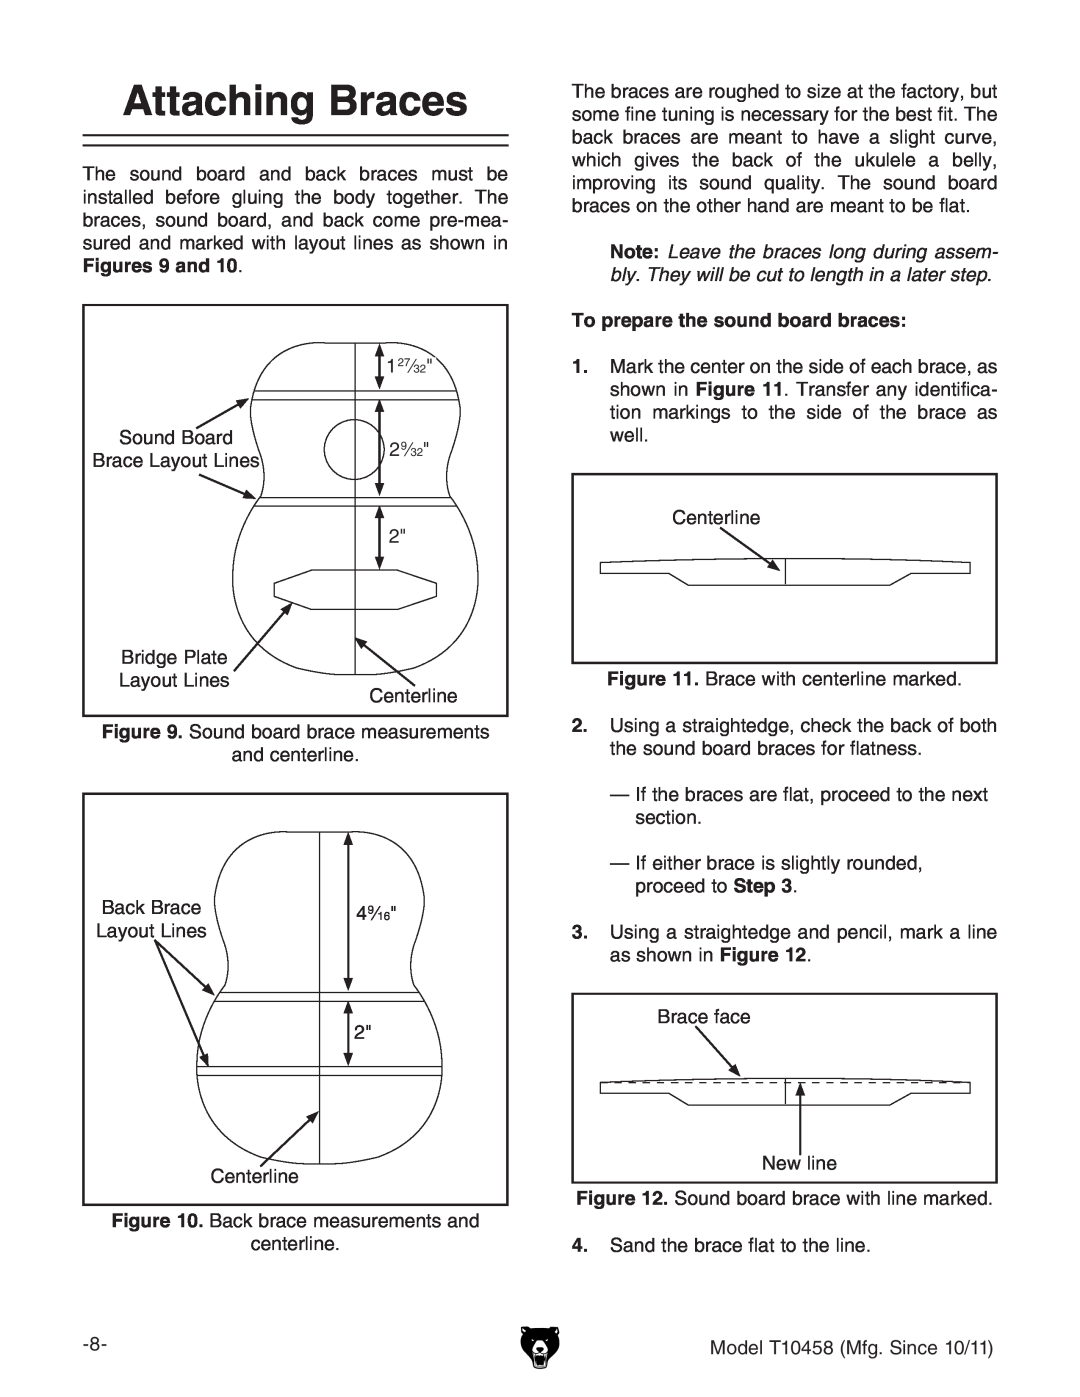 Grizzly T10458 instruction manual Attaching Braces, To prepare the sound board braces 